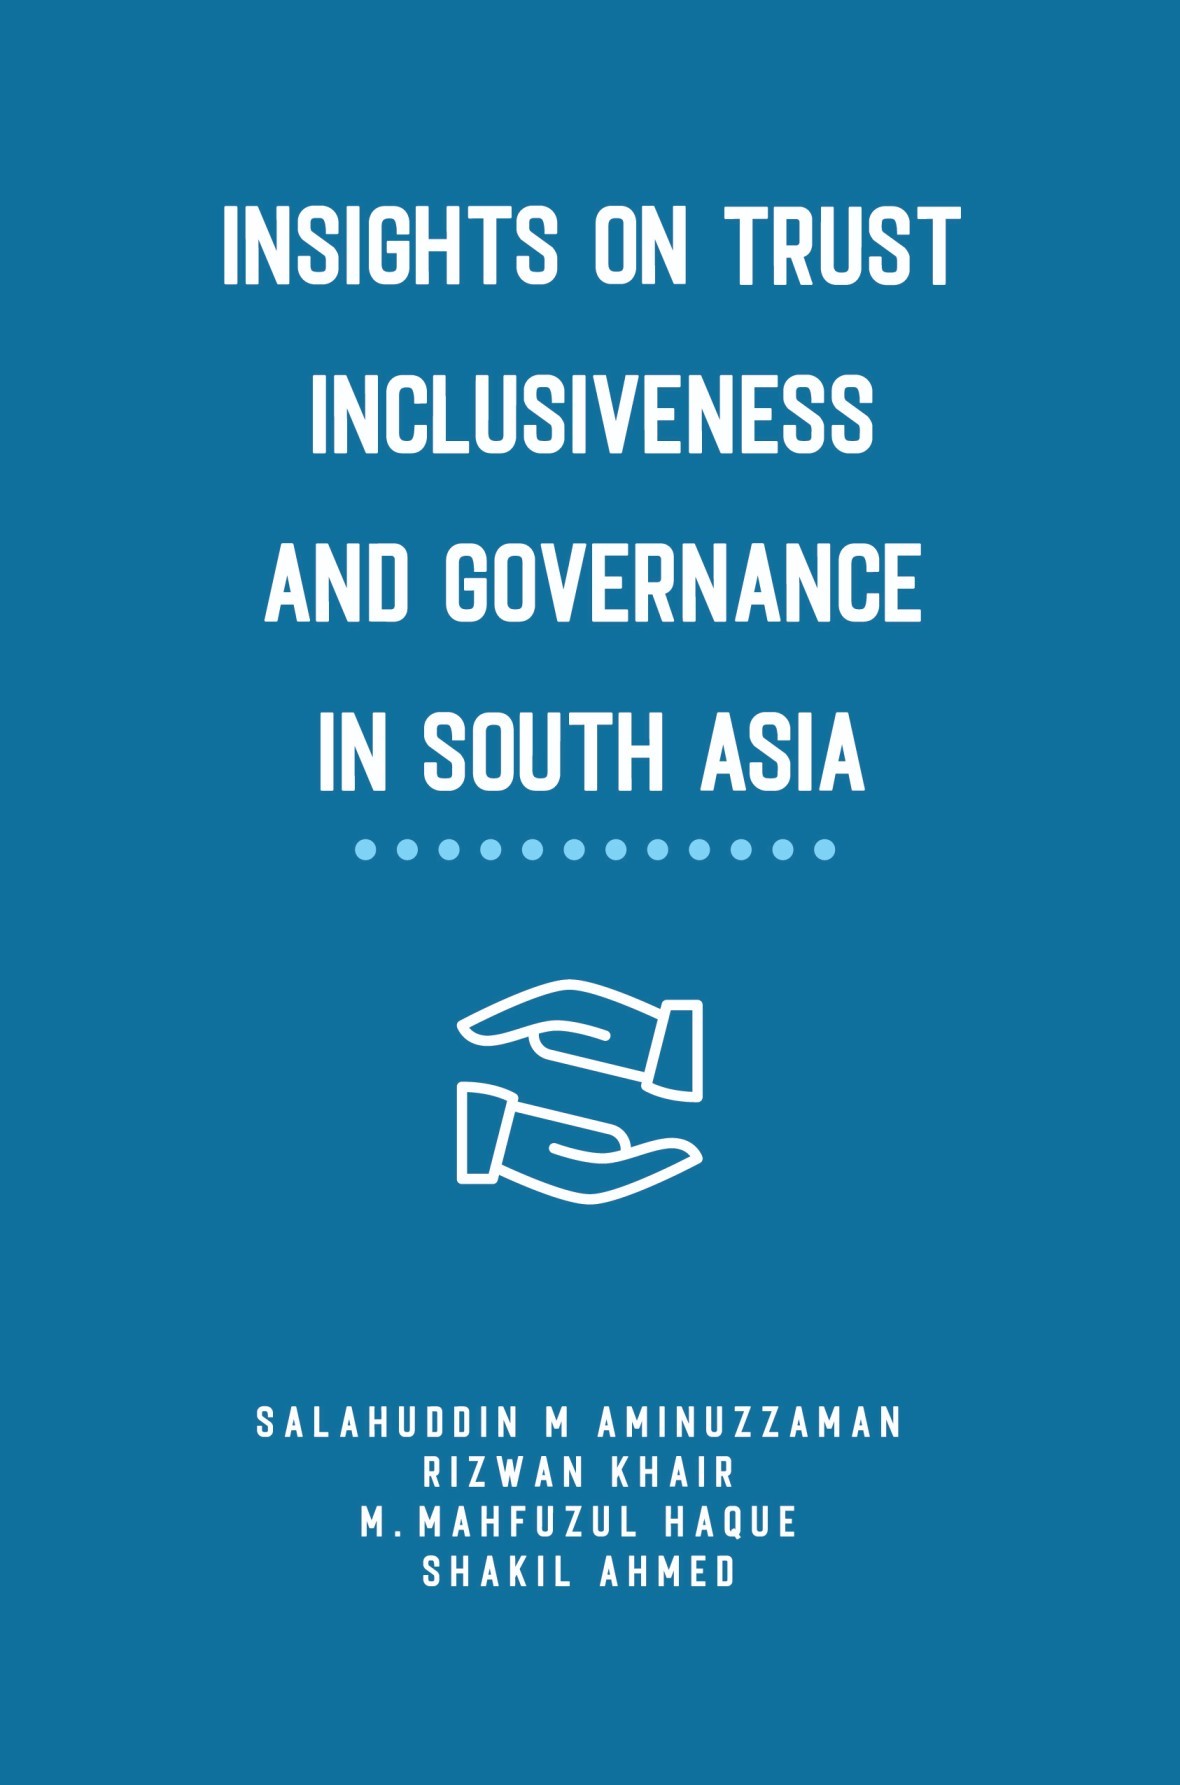 Insights on Trust Inclusiveness and Governance in South Asia